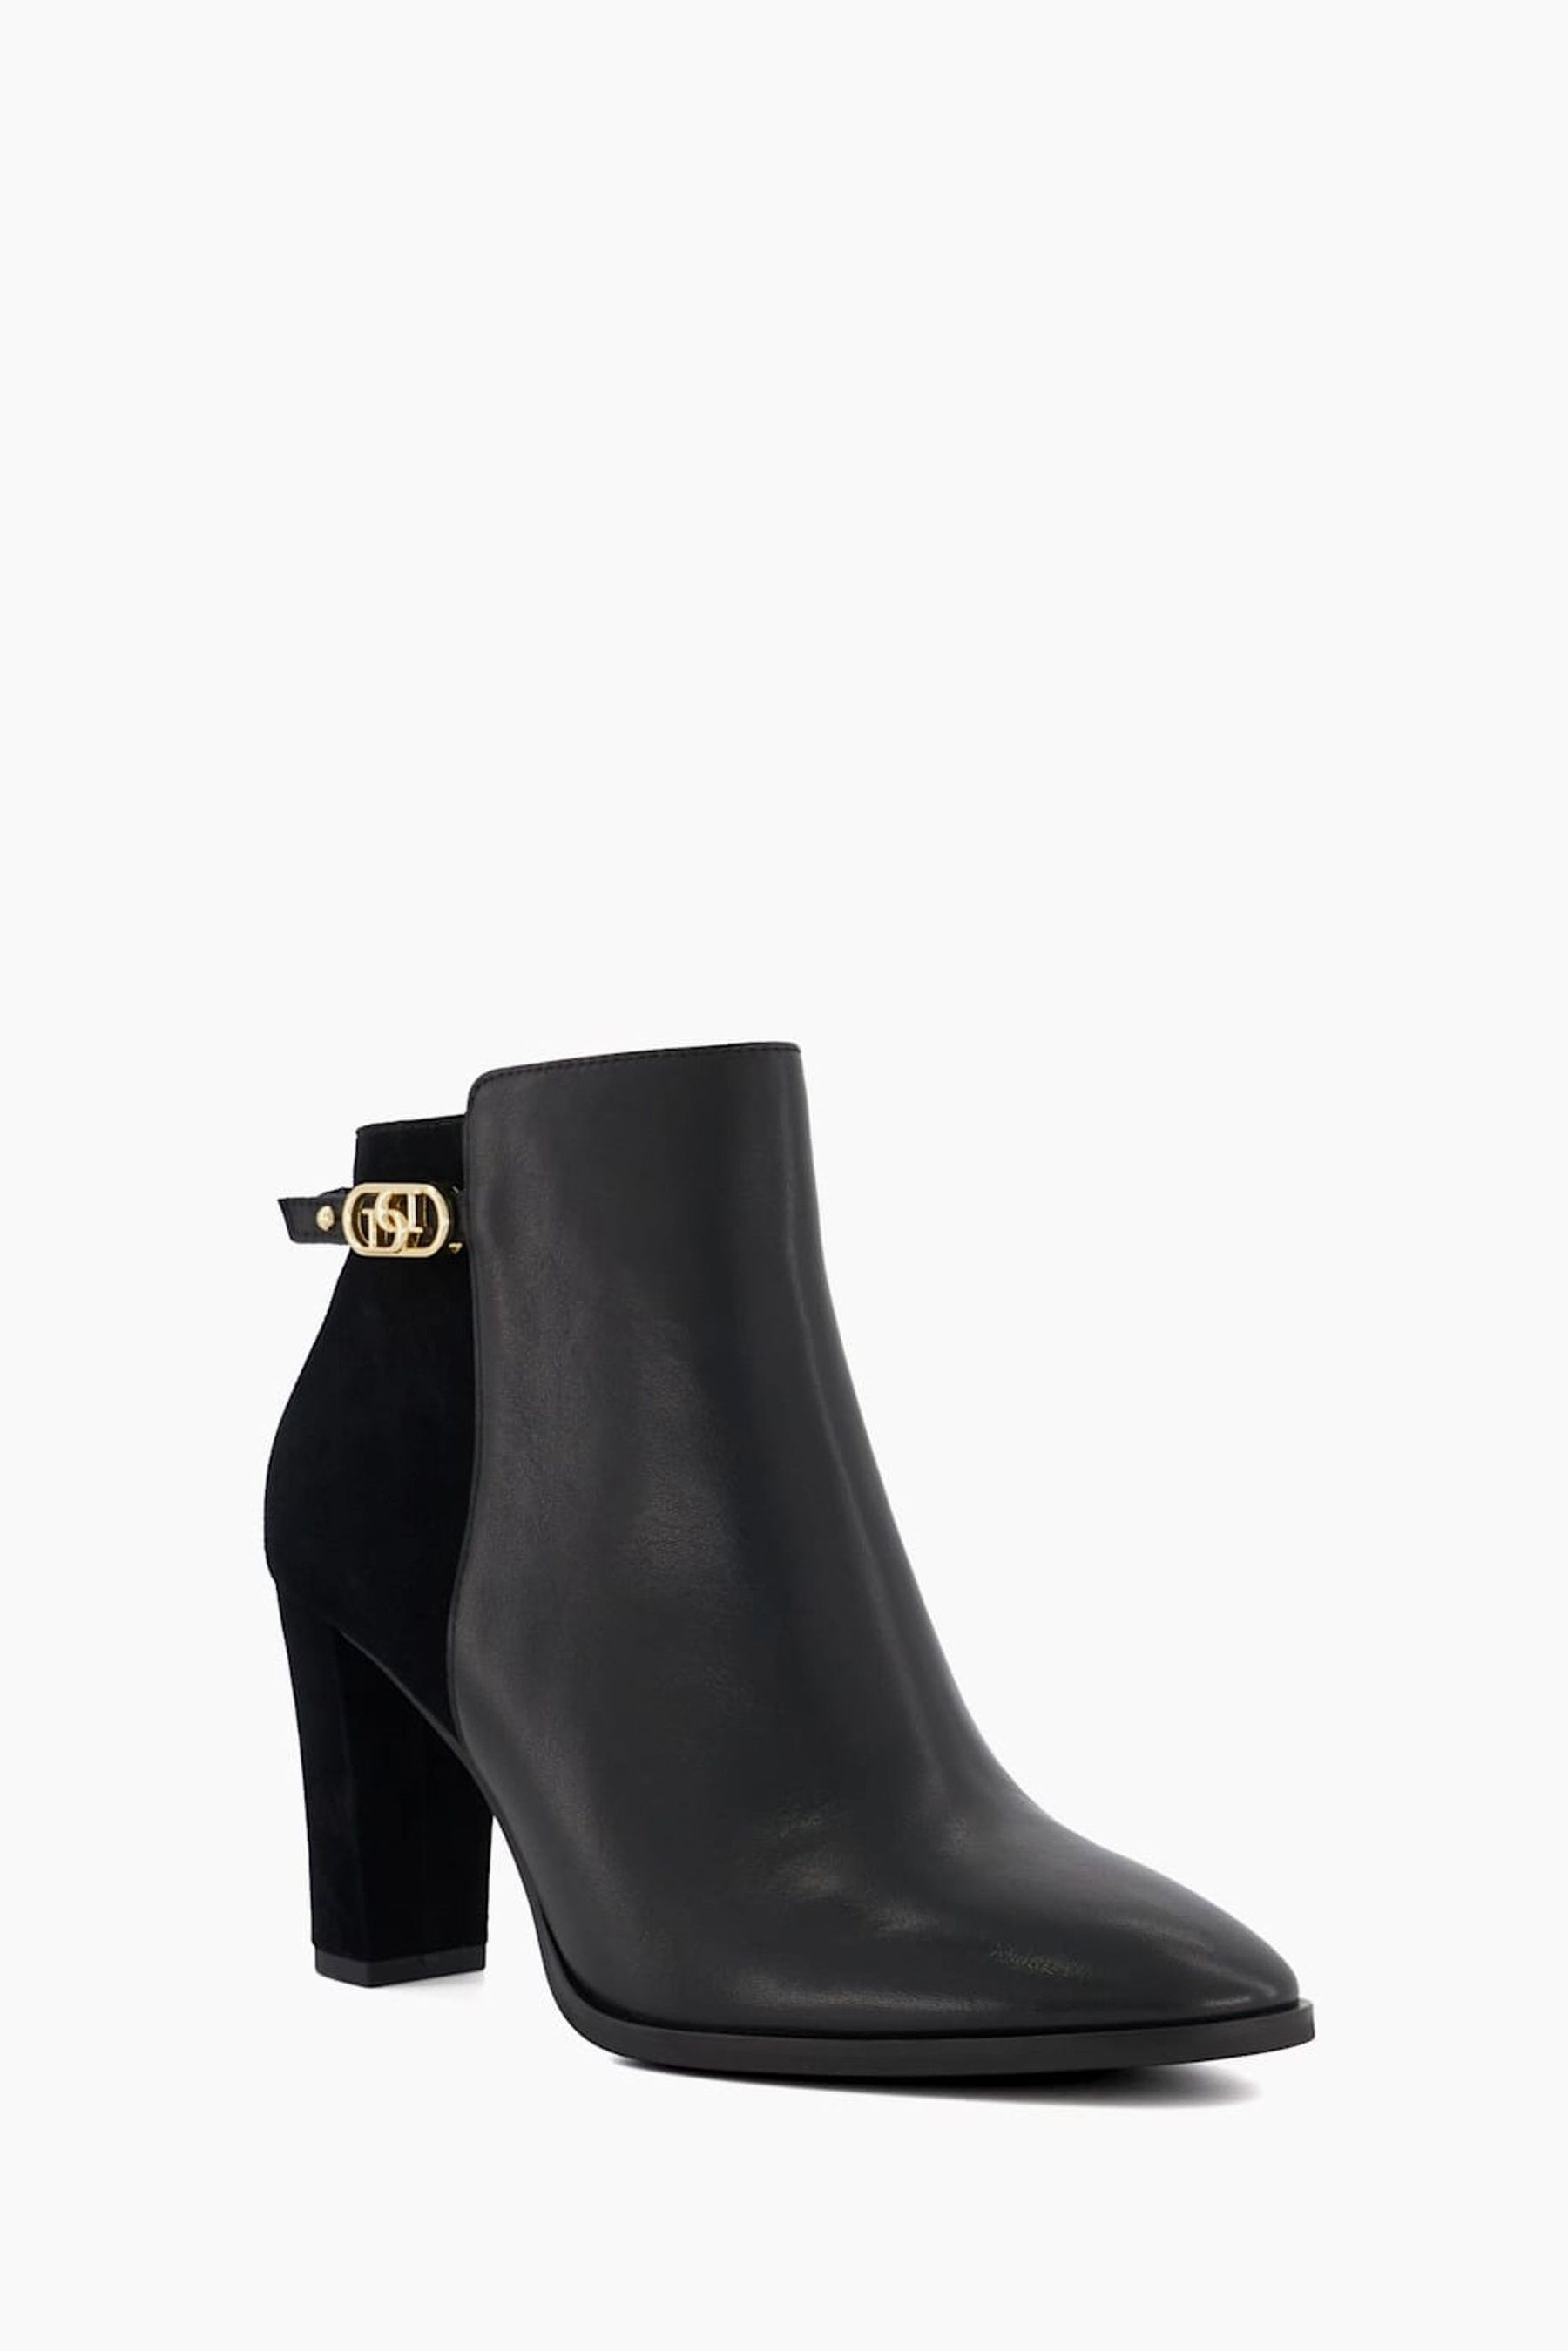 Buy Dune London Black Almond Toe Olia Buckle Low Boots from the Next UK ...